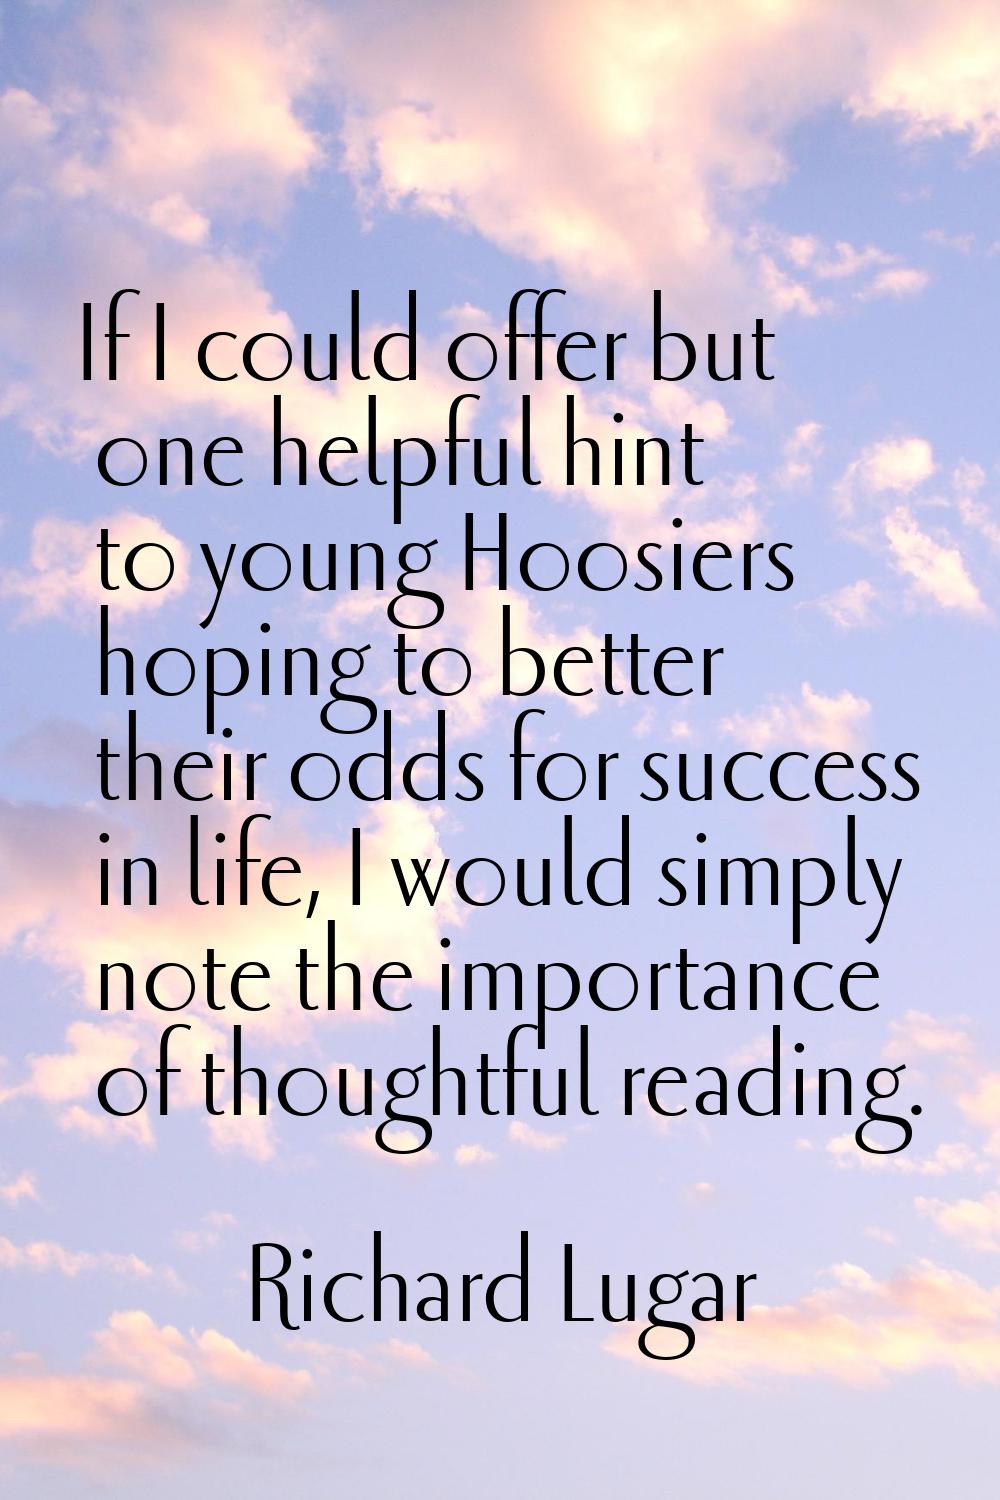 If I could offer but one helpful hint to young Hoosiers hoping to better their odds for success in 